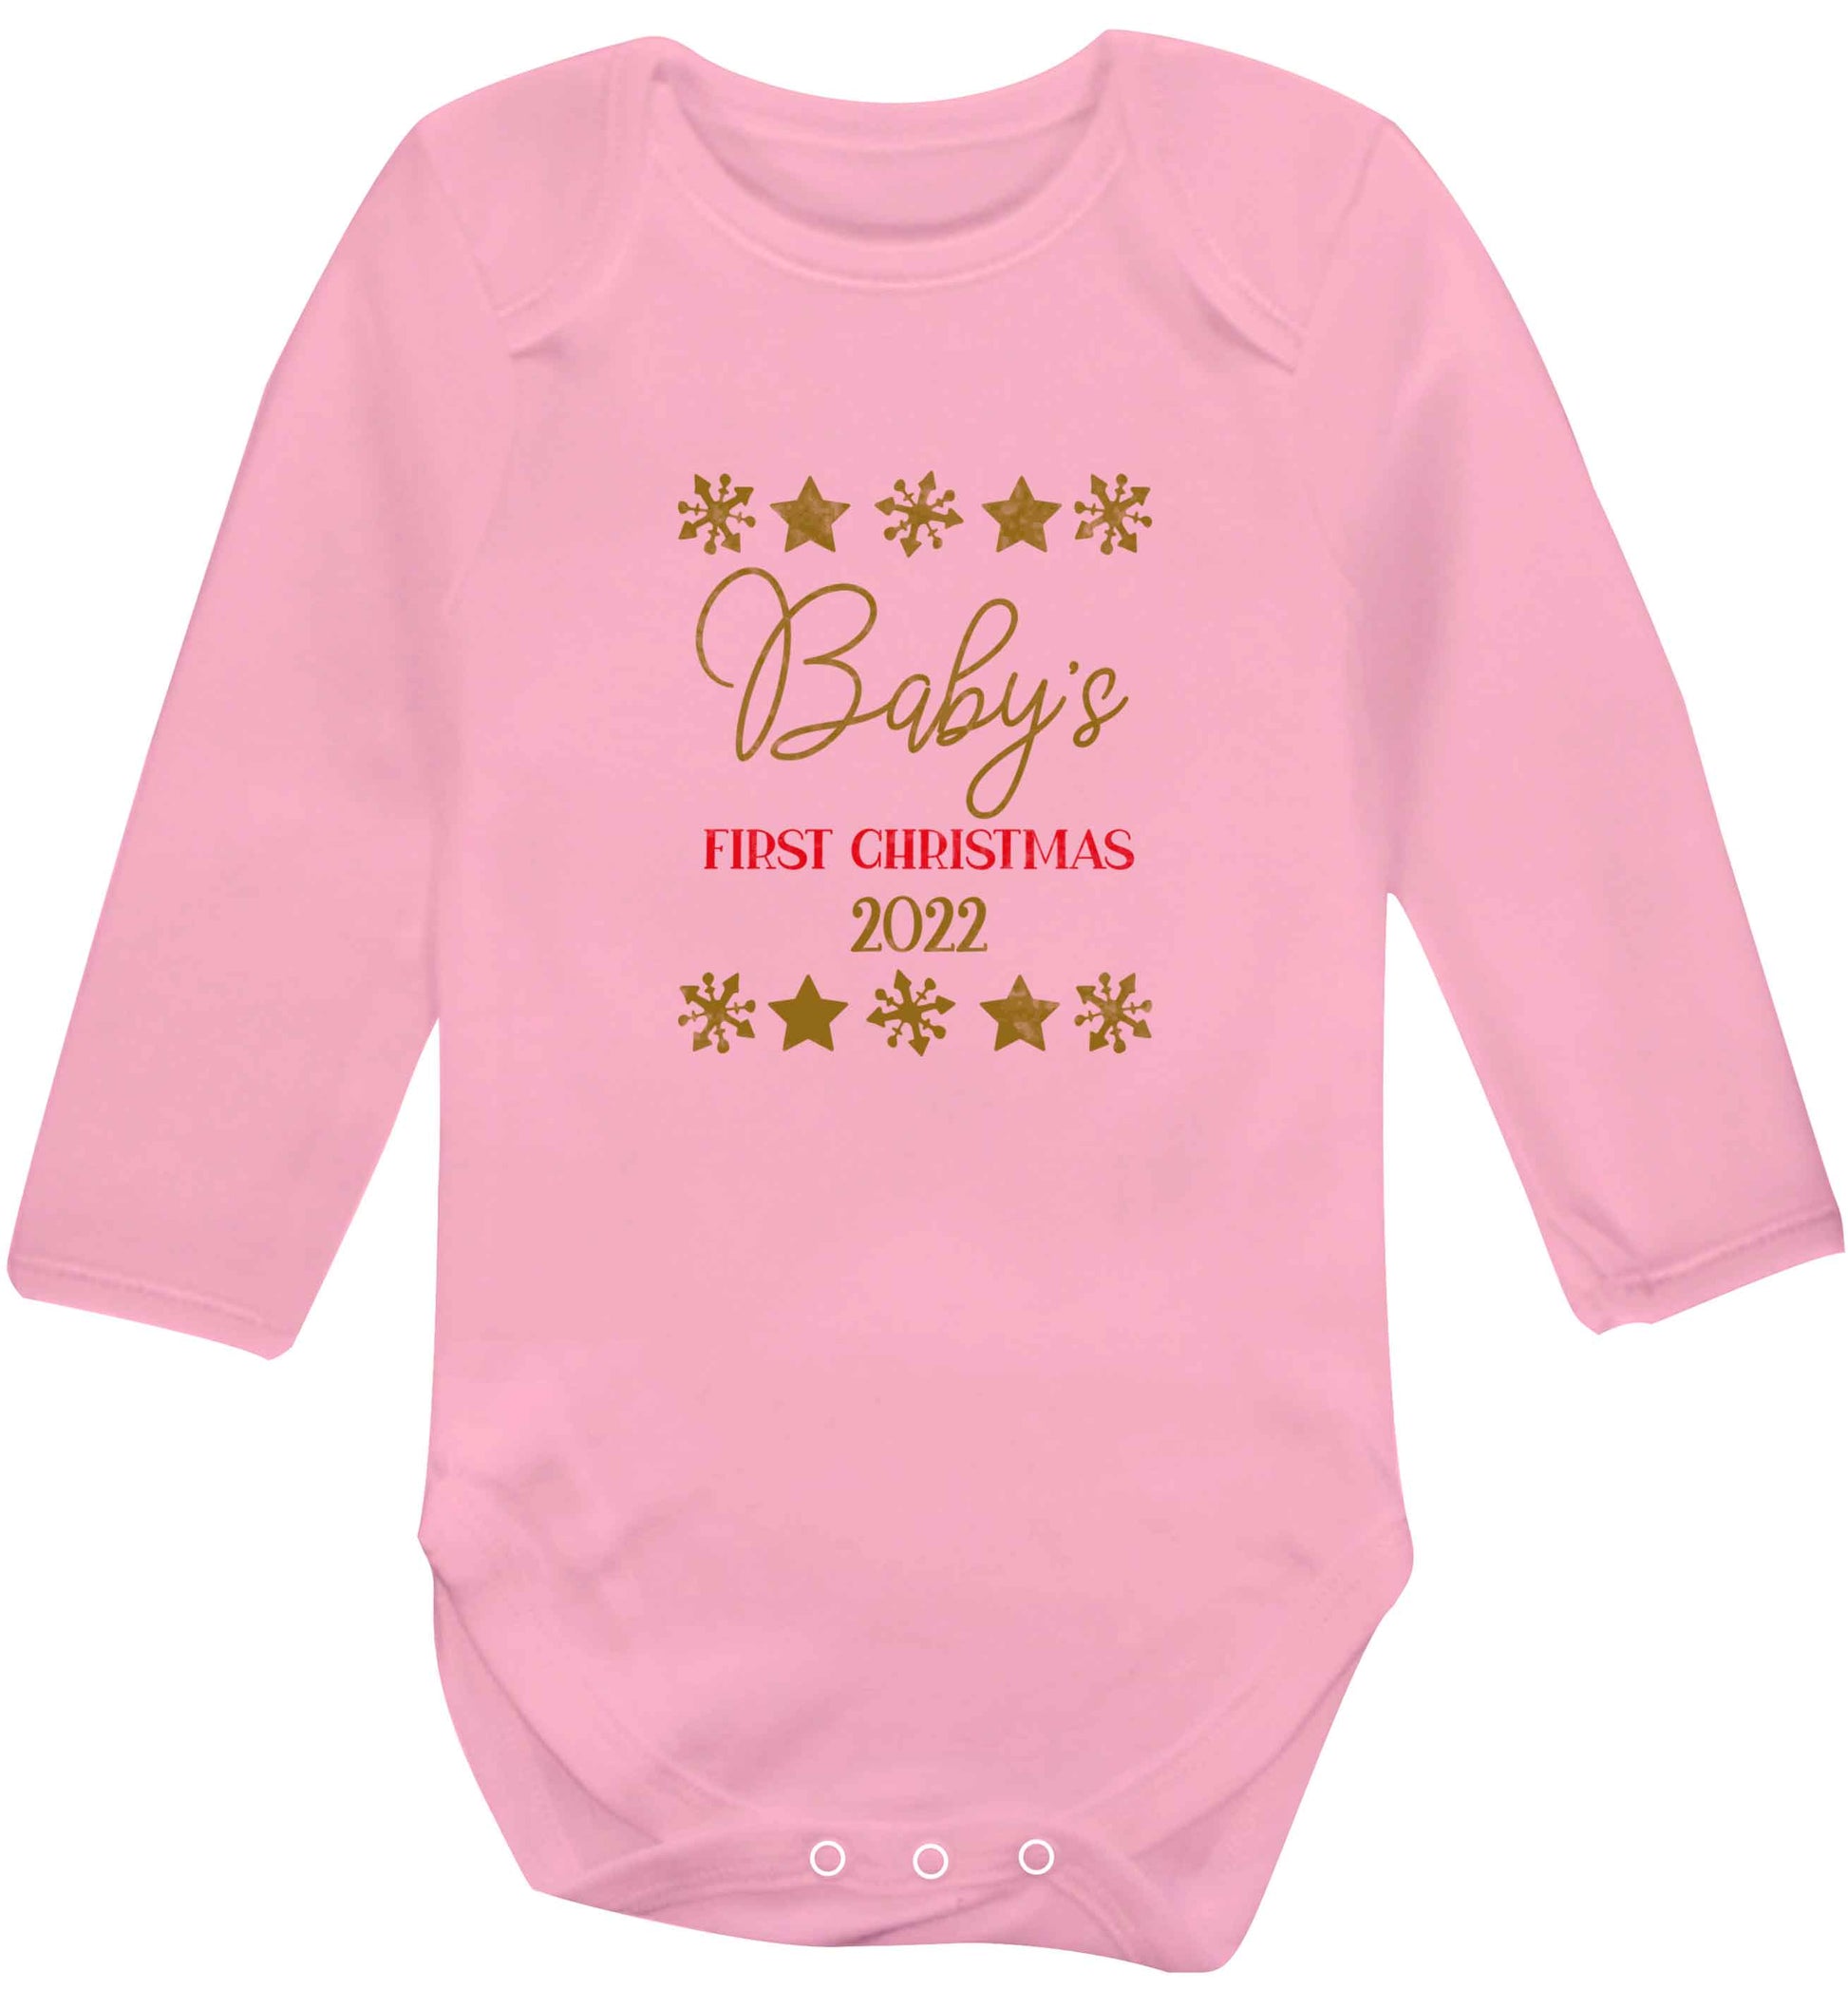 Baby's first Christmas baby vest long sleeved pale pink 6-12 months